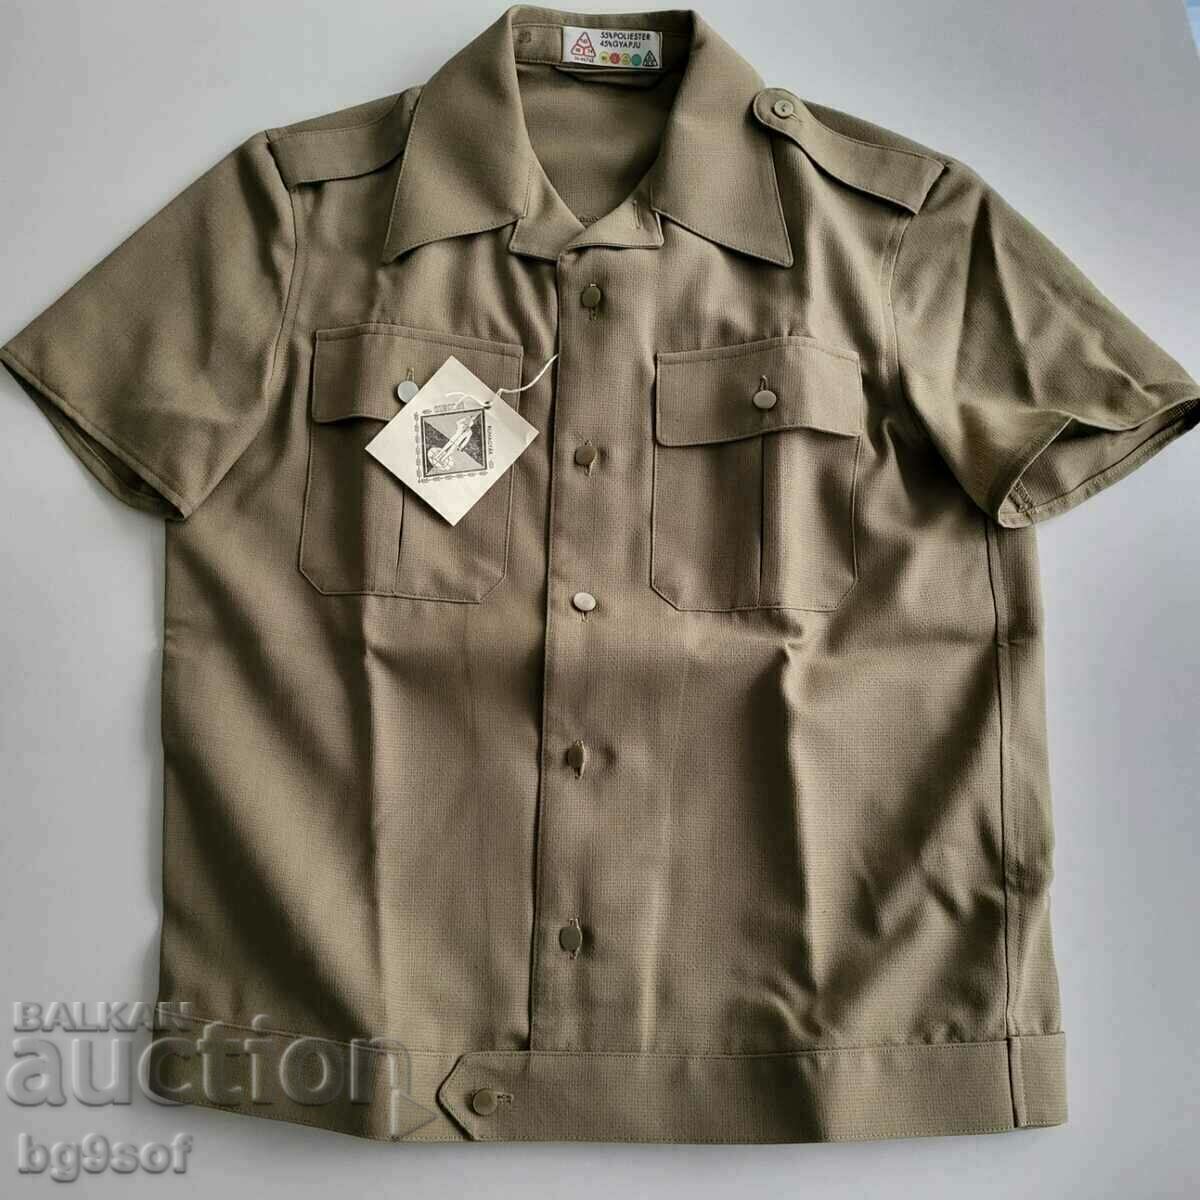 Military summer shirt with short sleeves